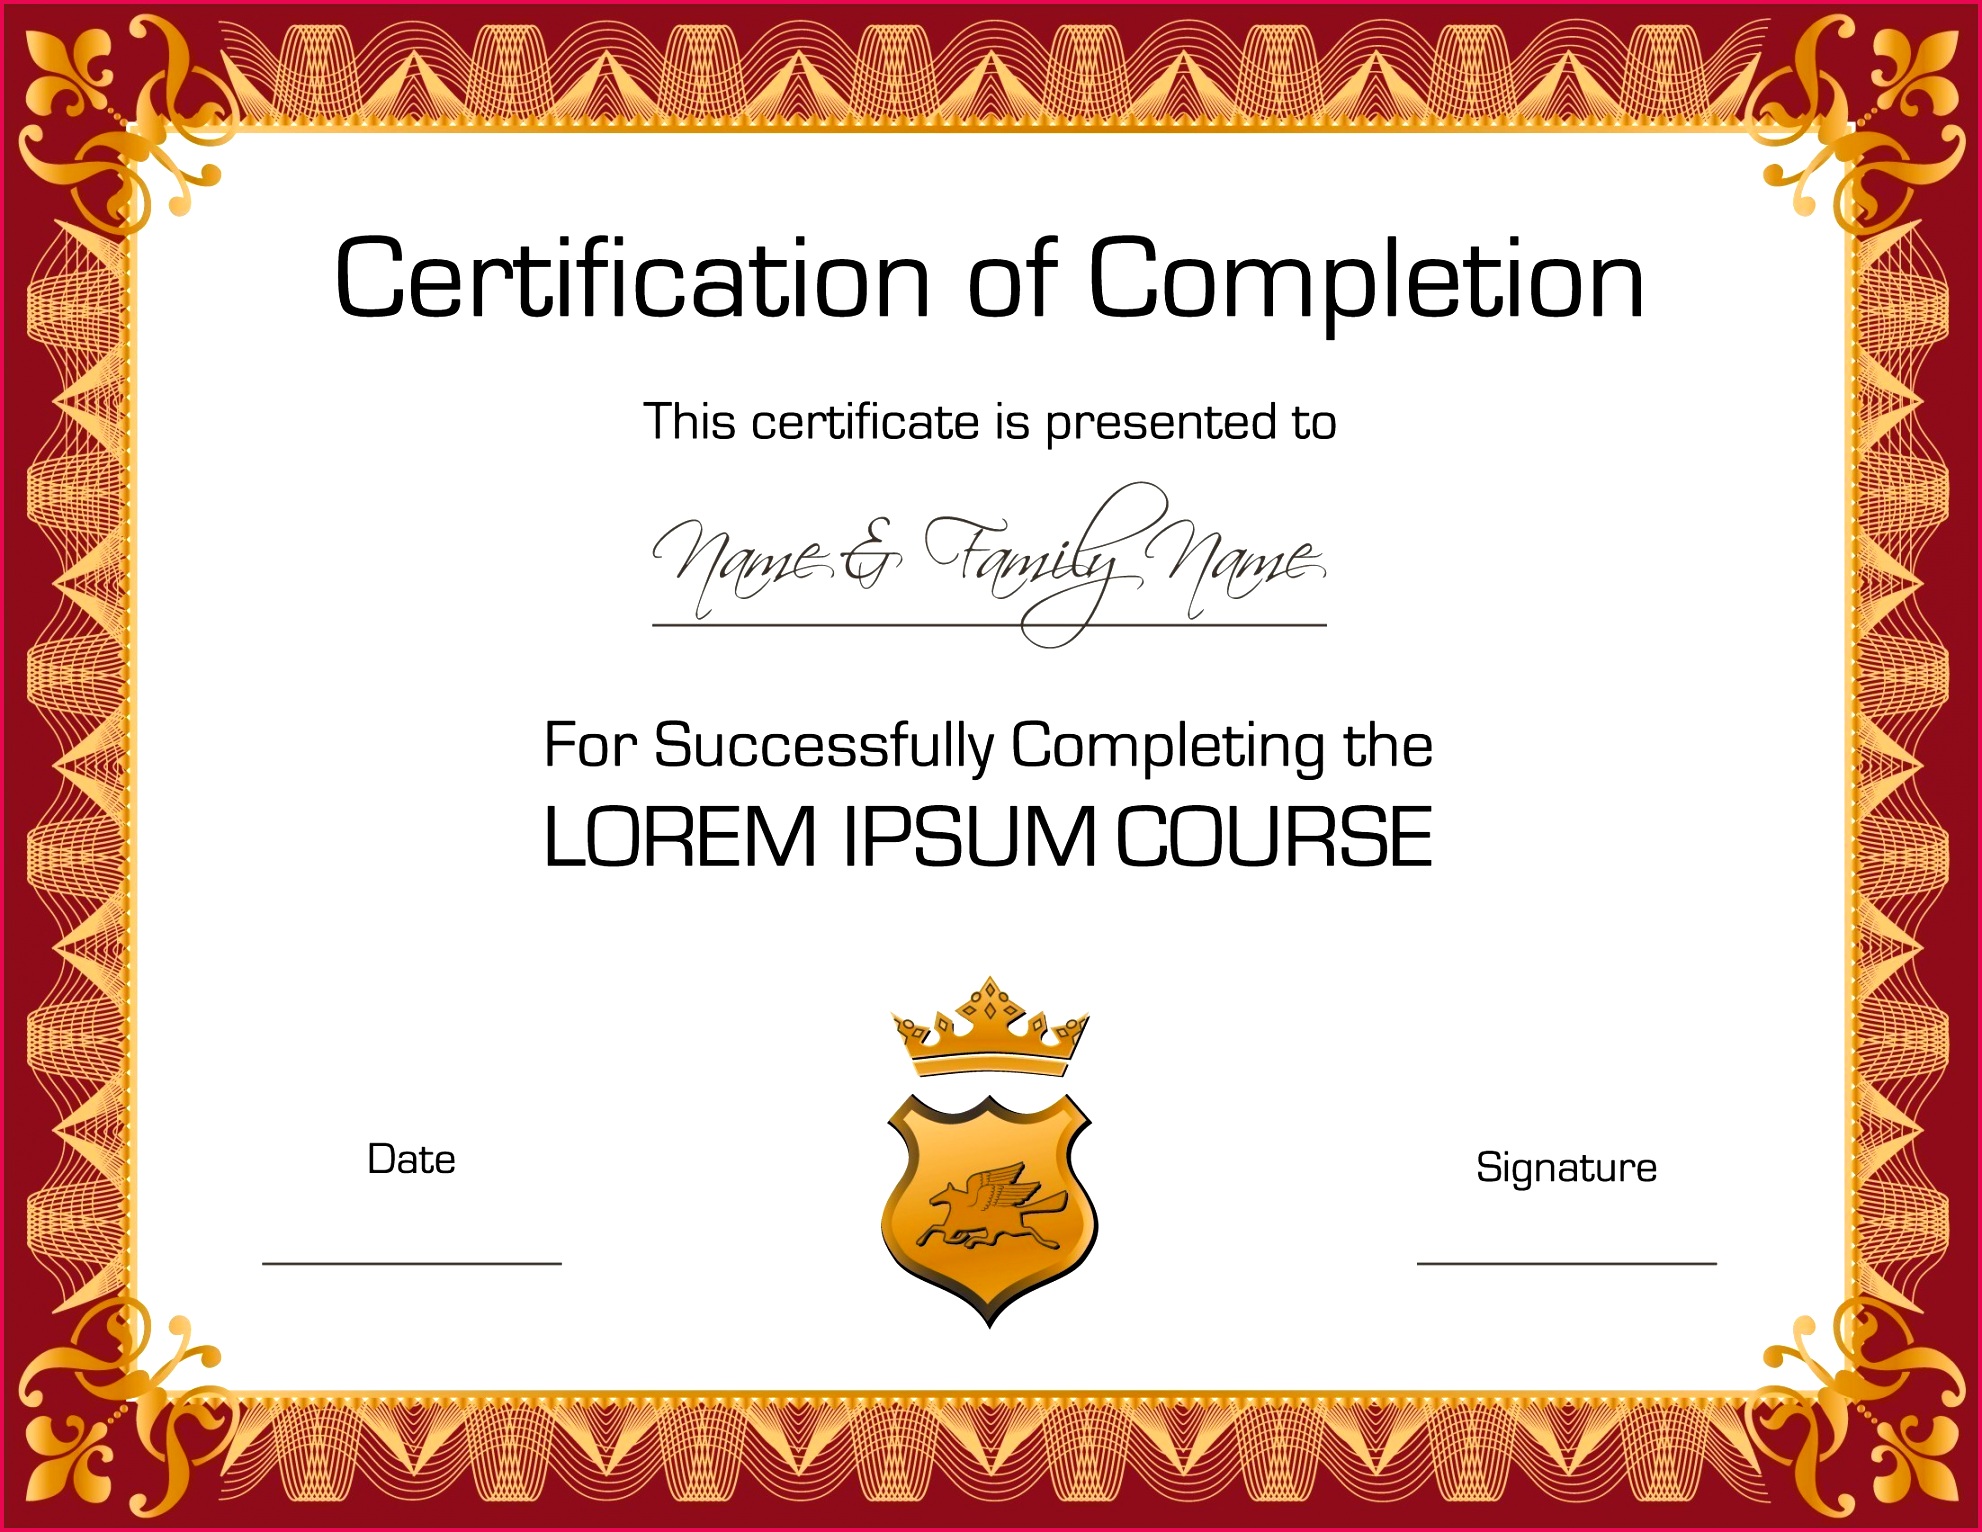 022 template ideas free printable certificates and awards luxury certificate vector copy award of